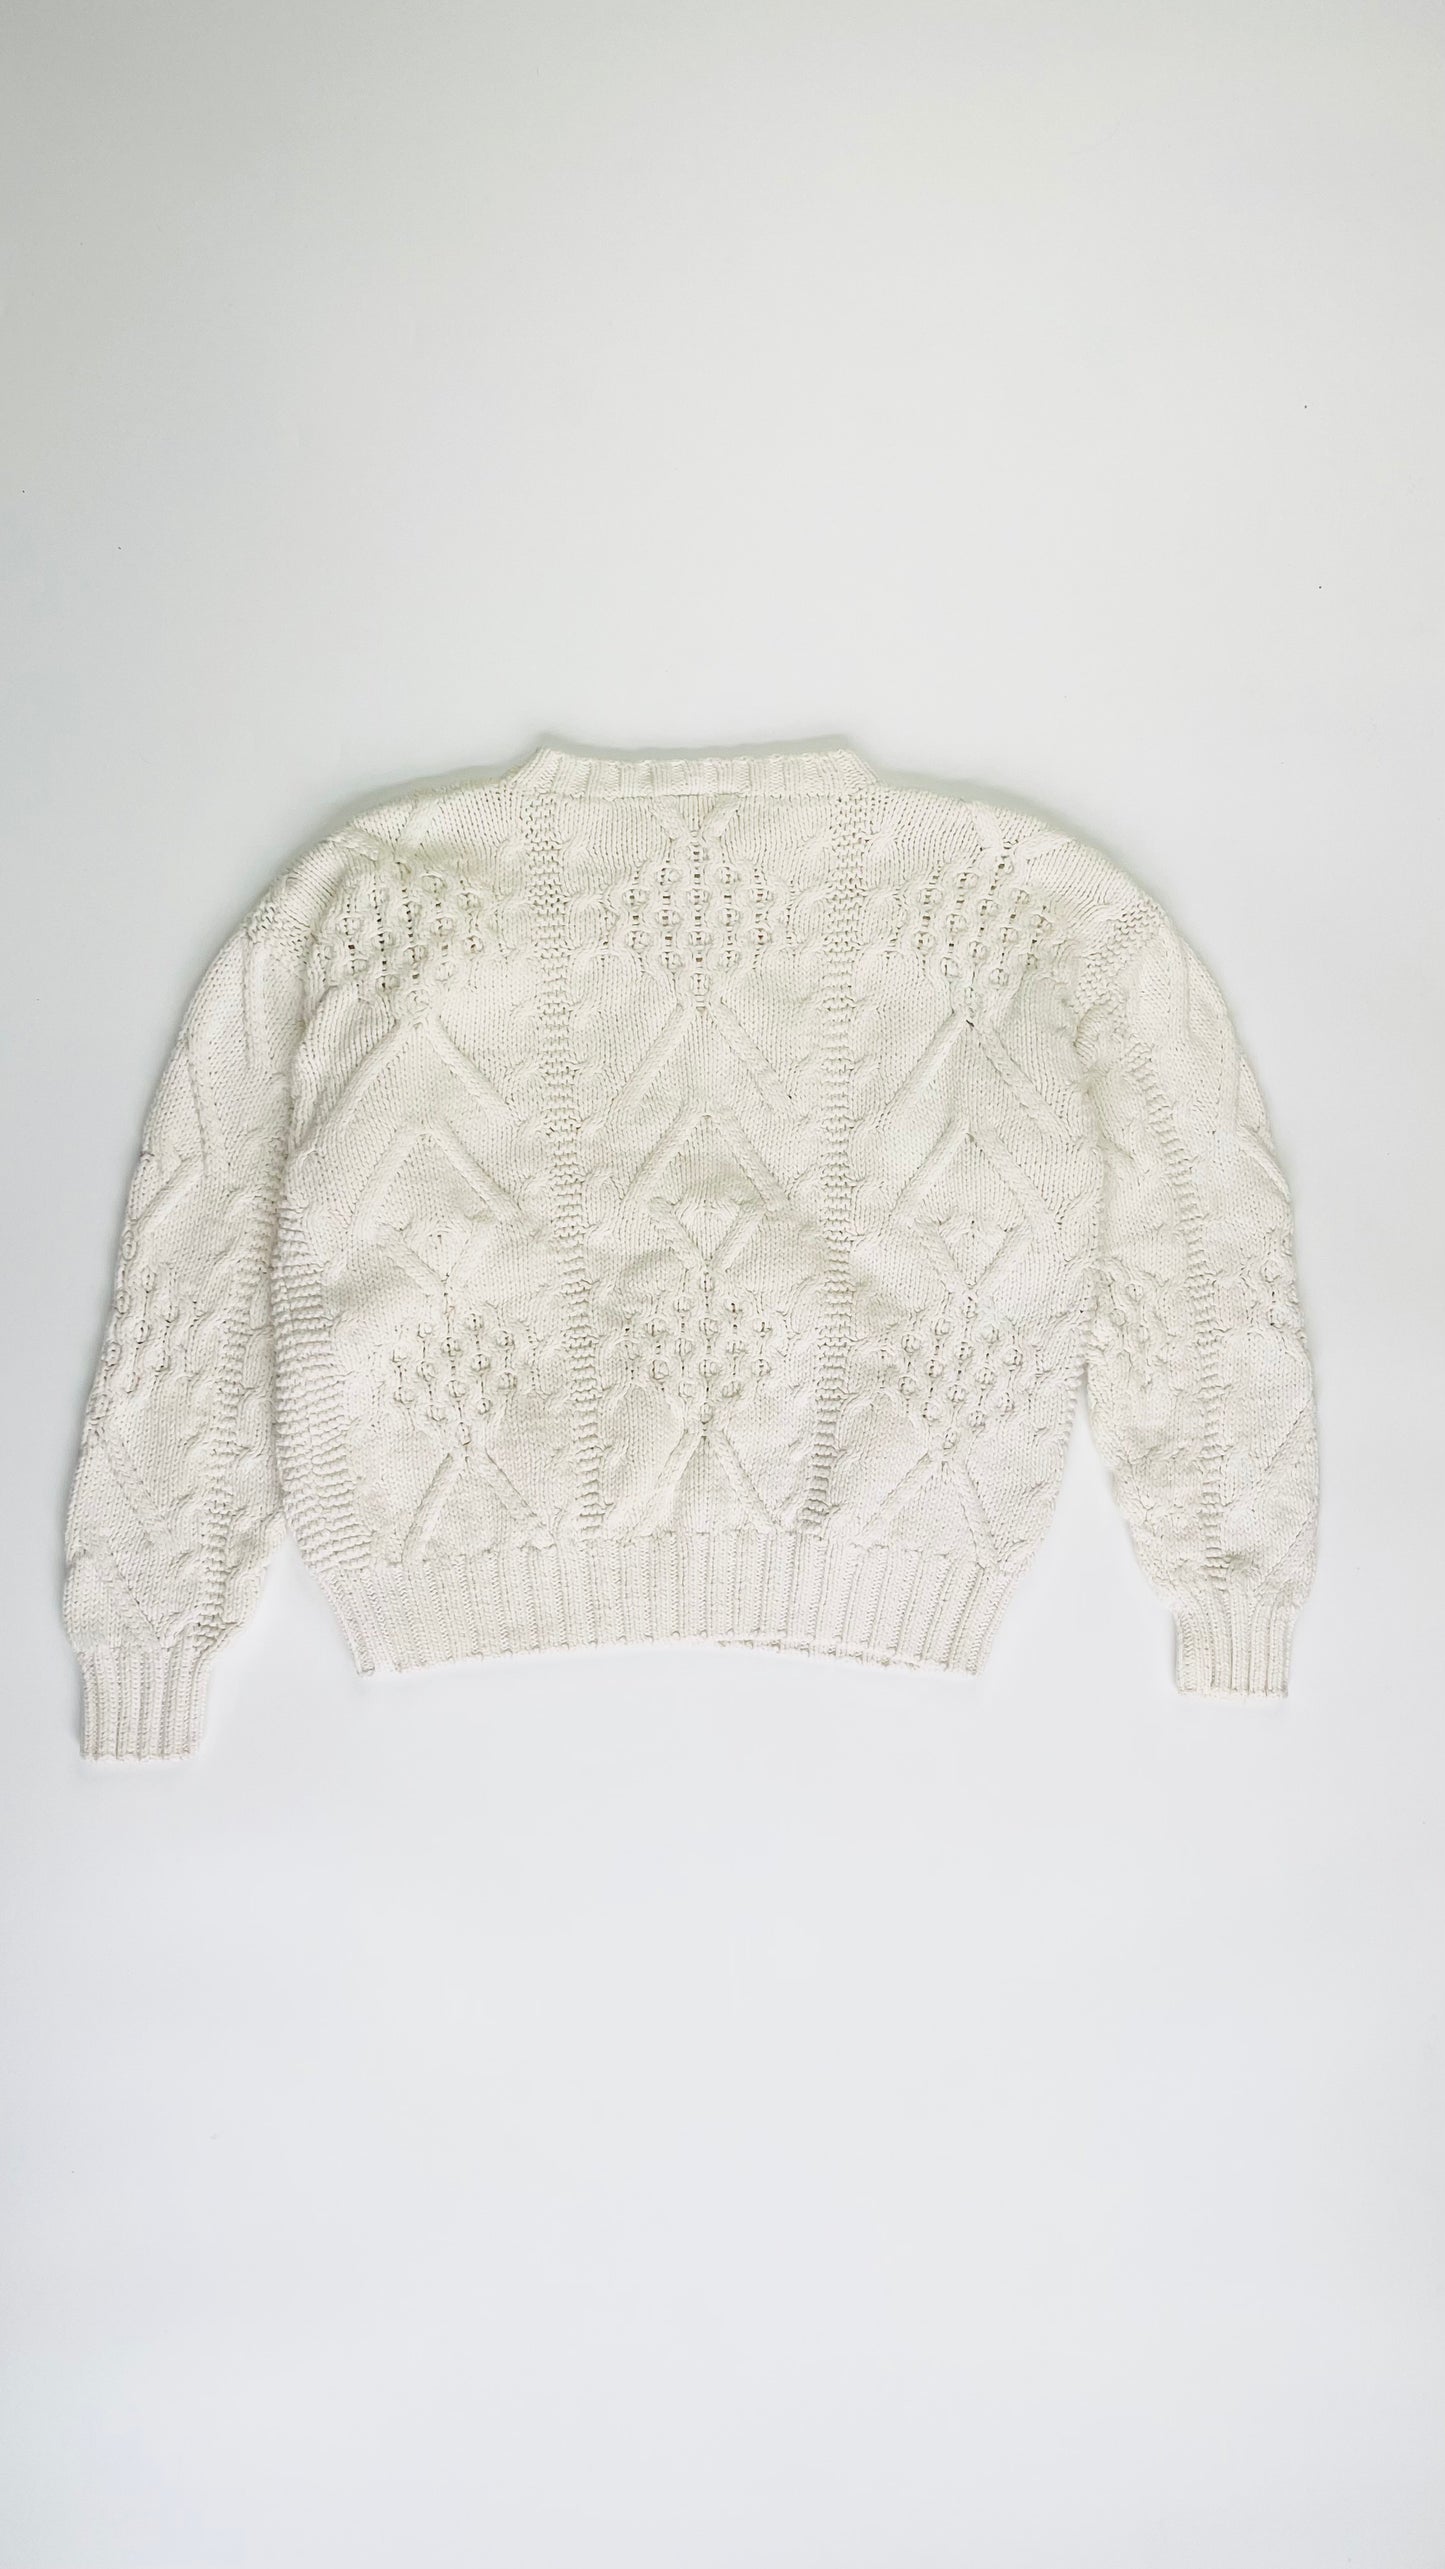 Vintage 90s Nordstrom cream knit sweater- Size M